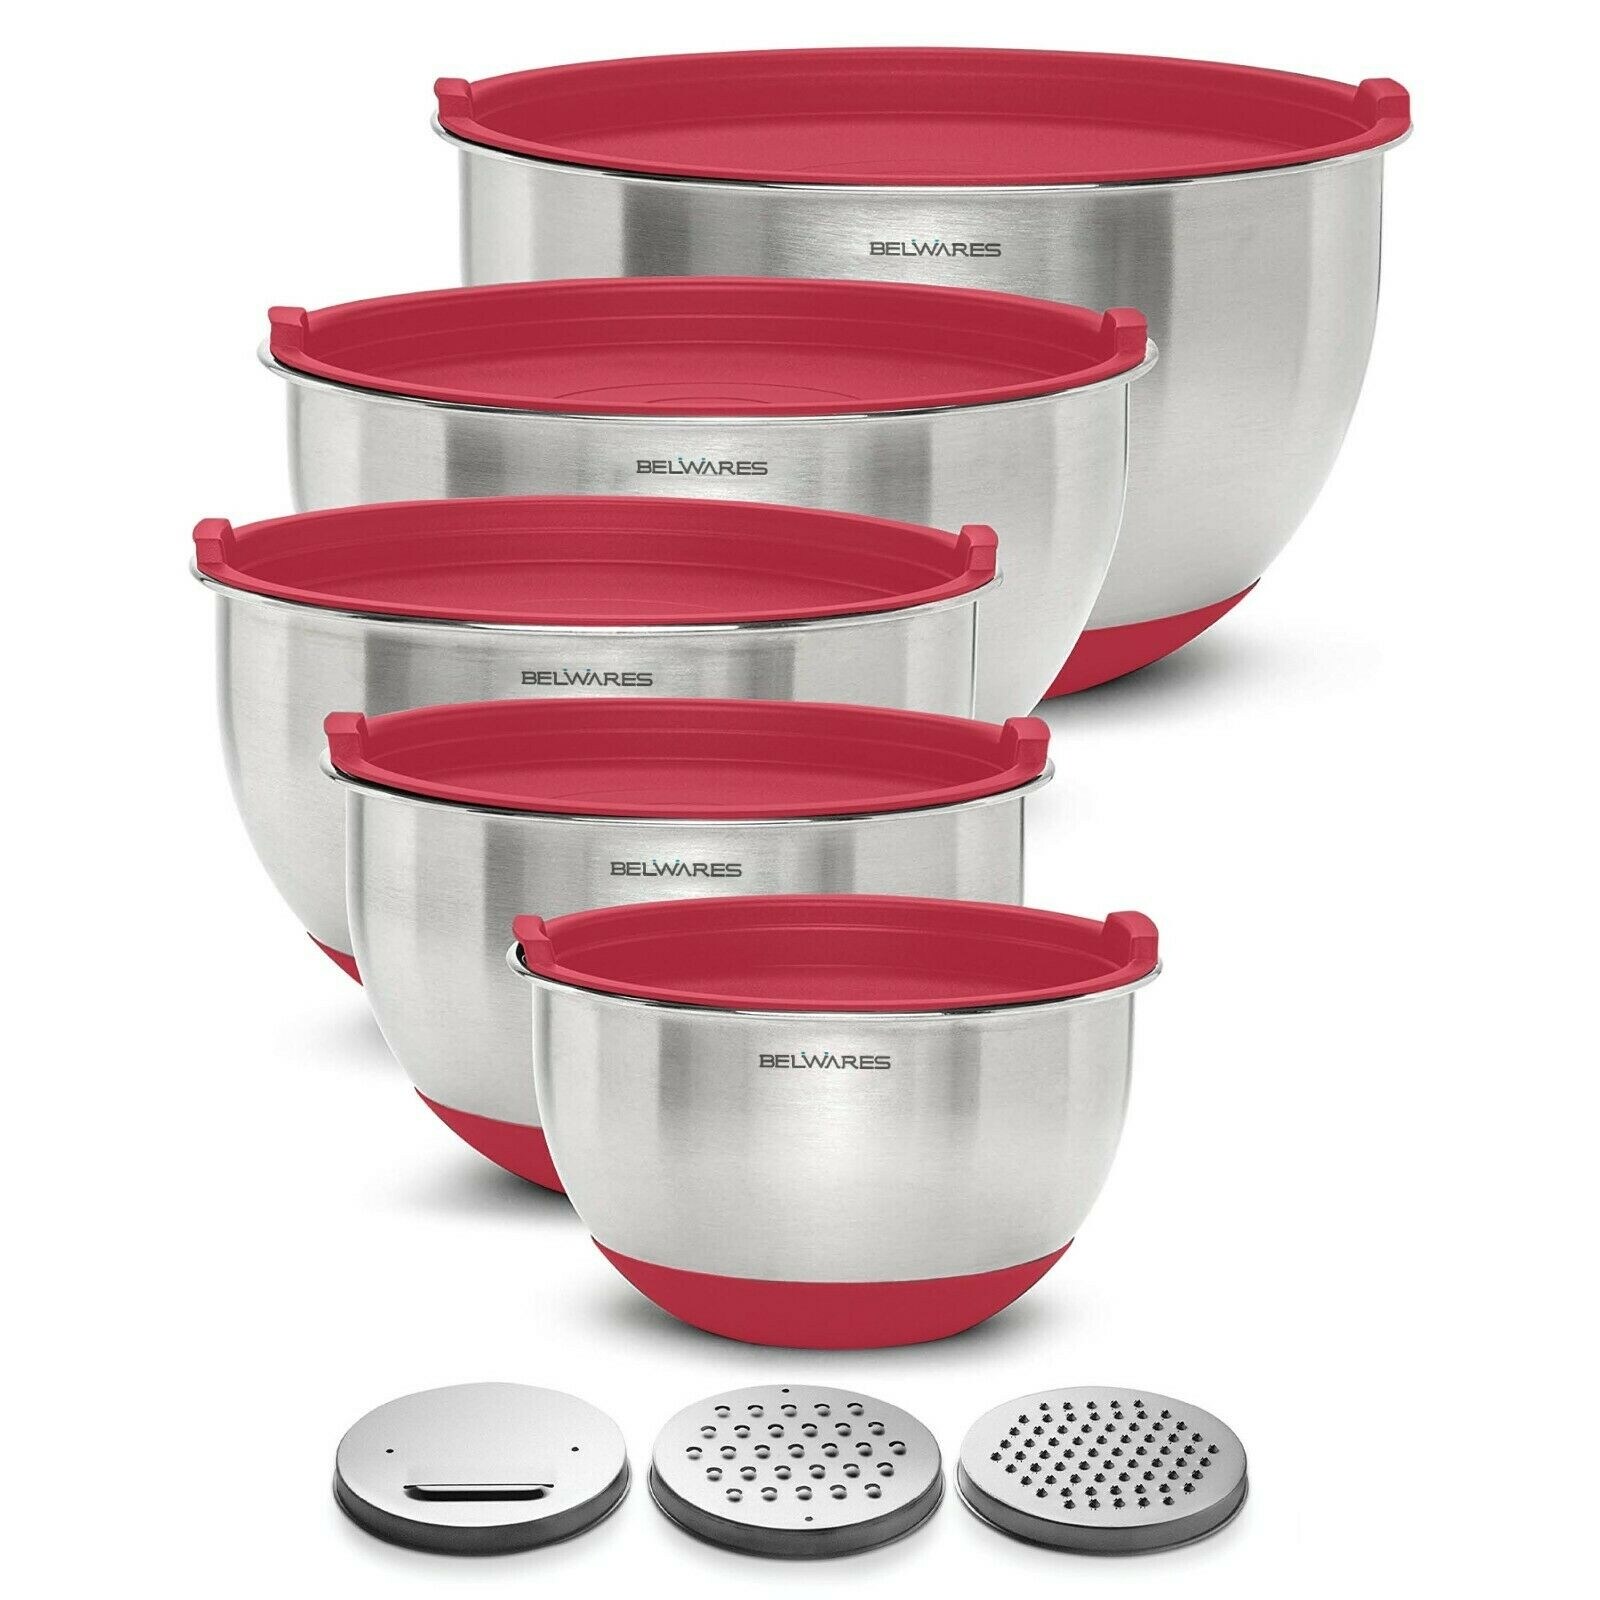 Belwares Mixing Bowls with Lids Set - Nesting Bowls with Graters, Handle,  Pour Spout, Airtight Lids - Stainless Steel Non-Slip Mixing Bowl for